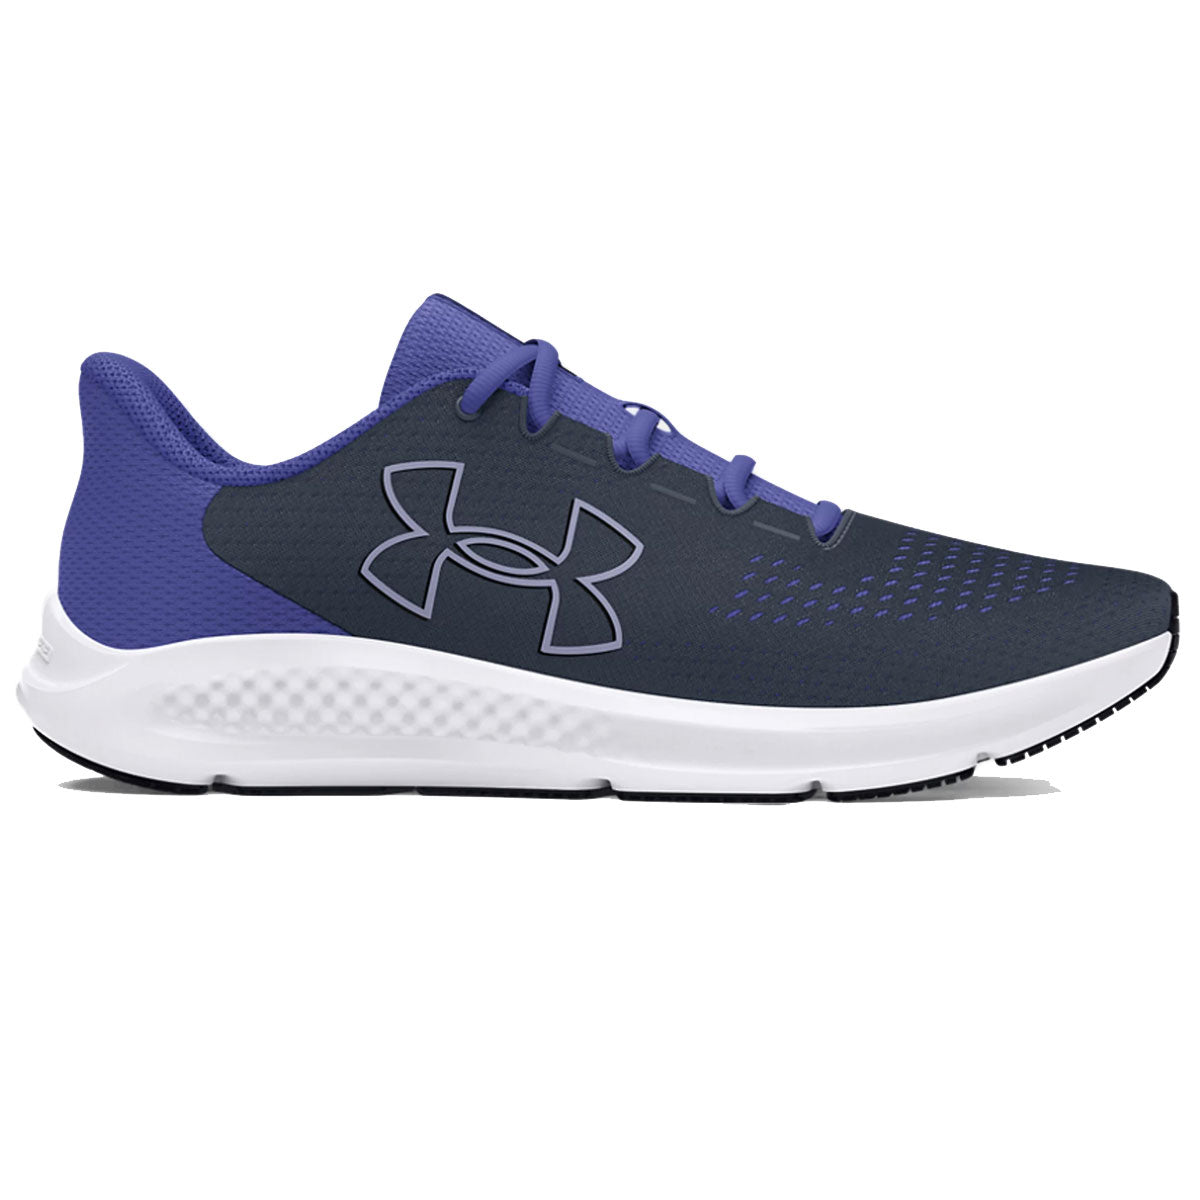 Under Armour Charged Pursuit 3 BL Running Shoes - Womens - Downpour Grey/Starlight/Black